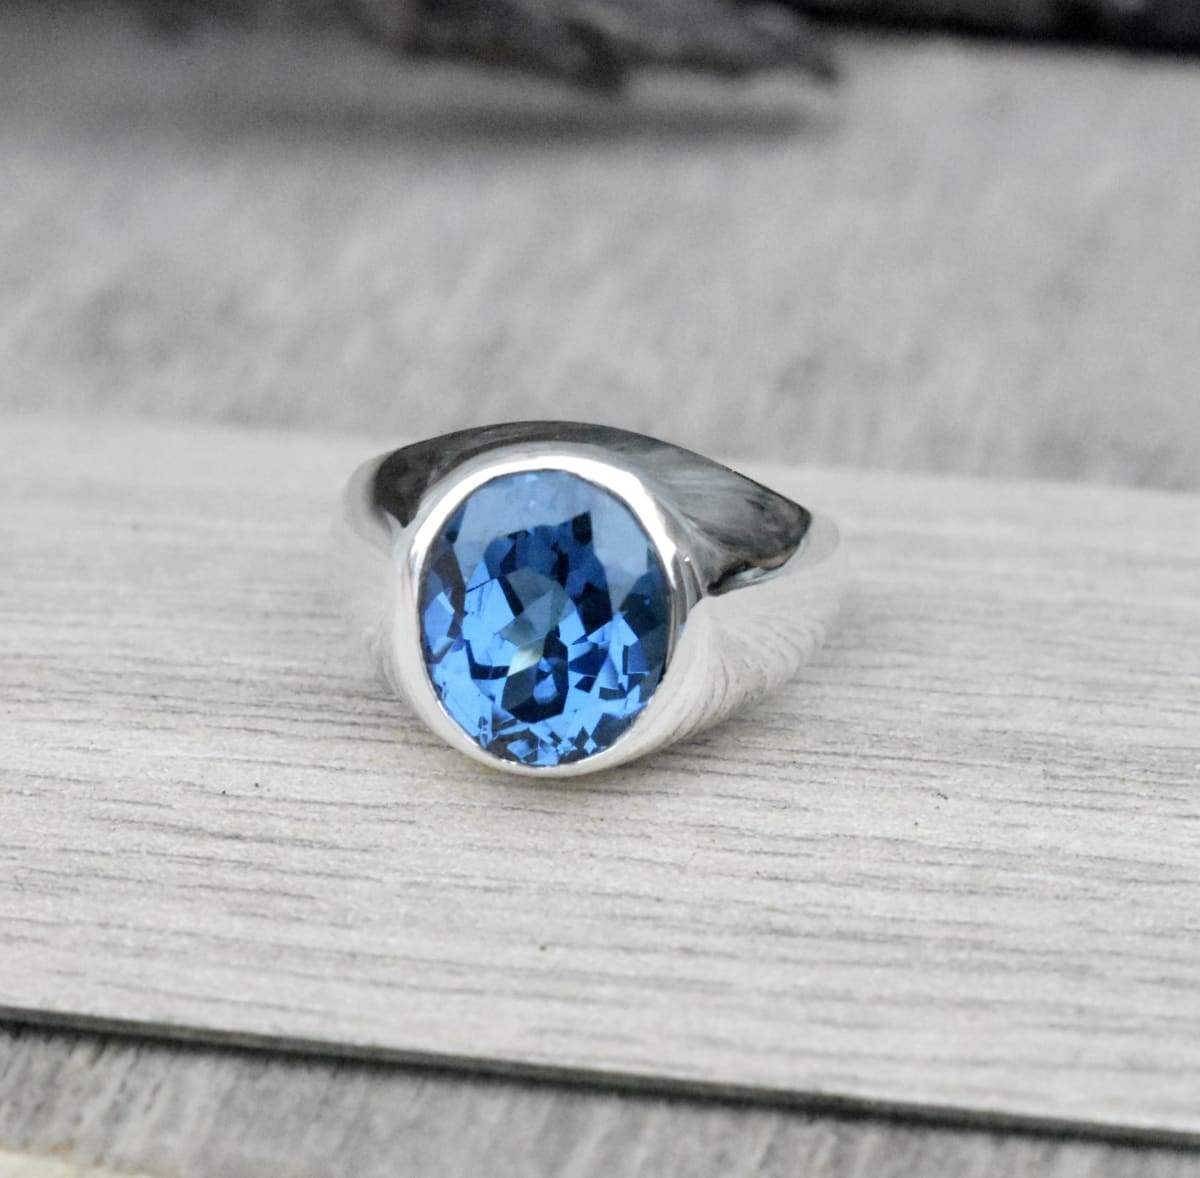 Yotreasure | Moonstone London Blue Topaz Solid 925 Sterling Silver Designer Bypass Ring Jewelry 7